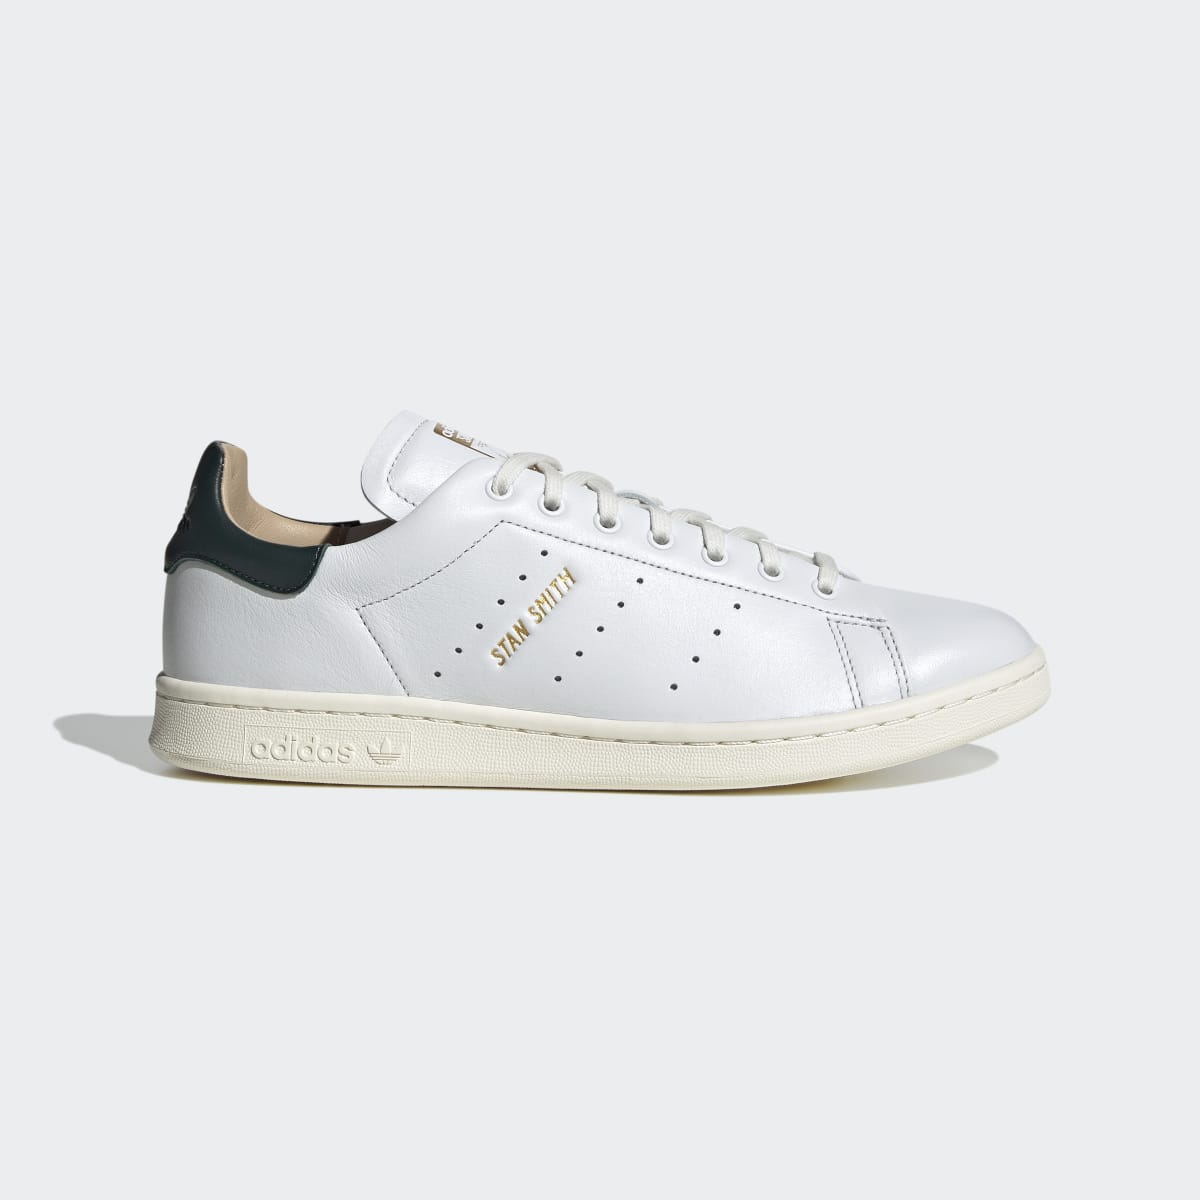 Adidas  STAN SMITH LUX HP2201